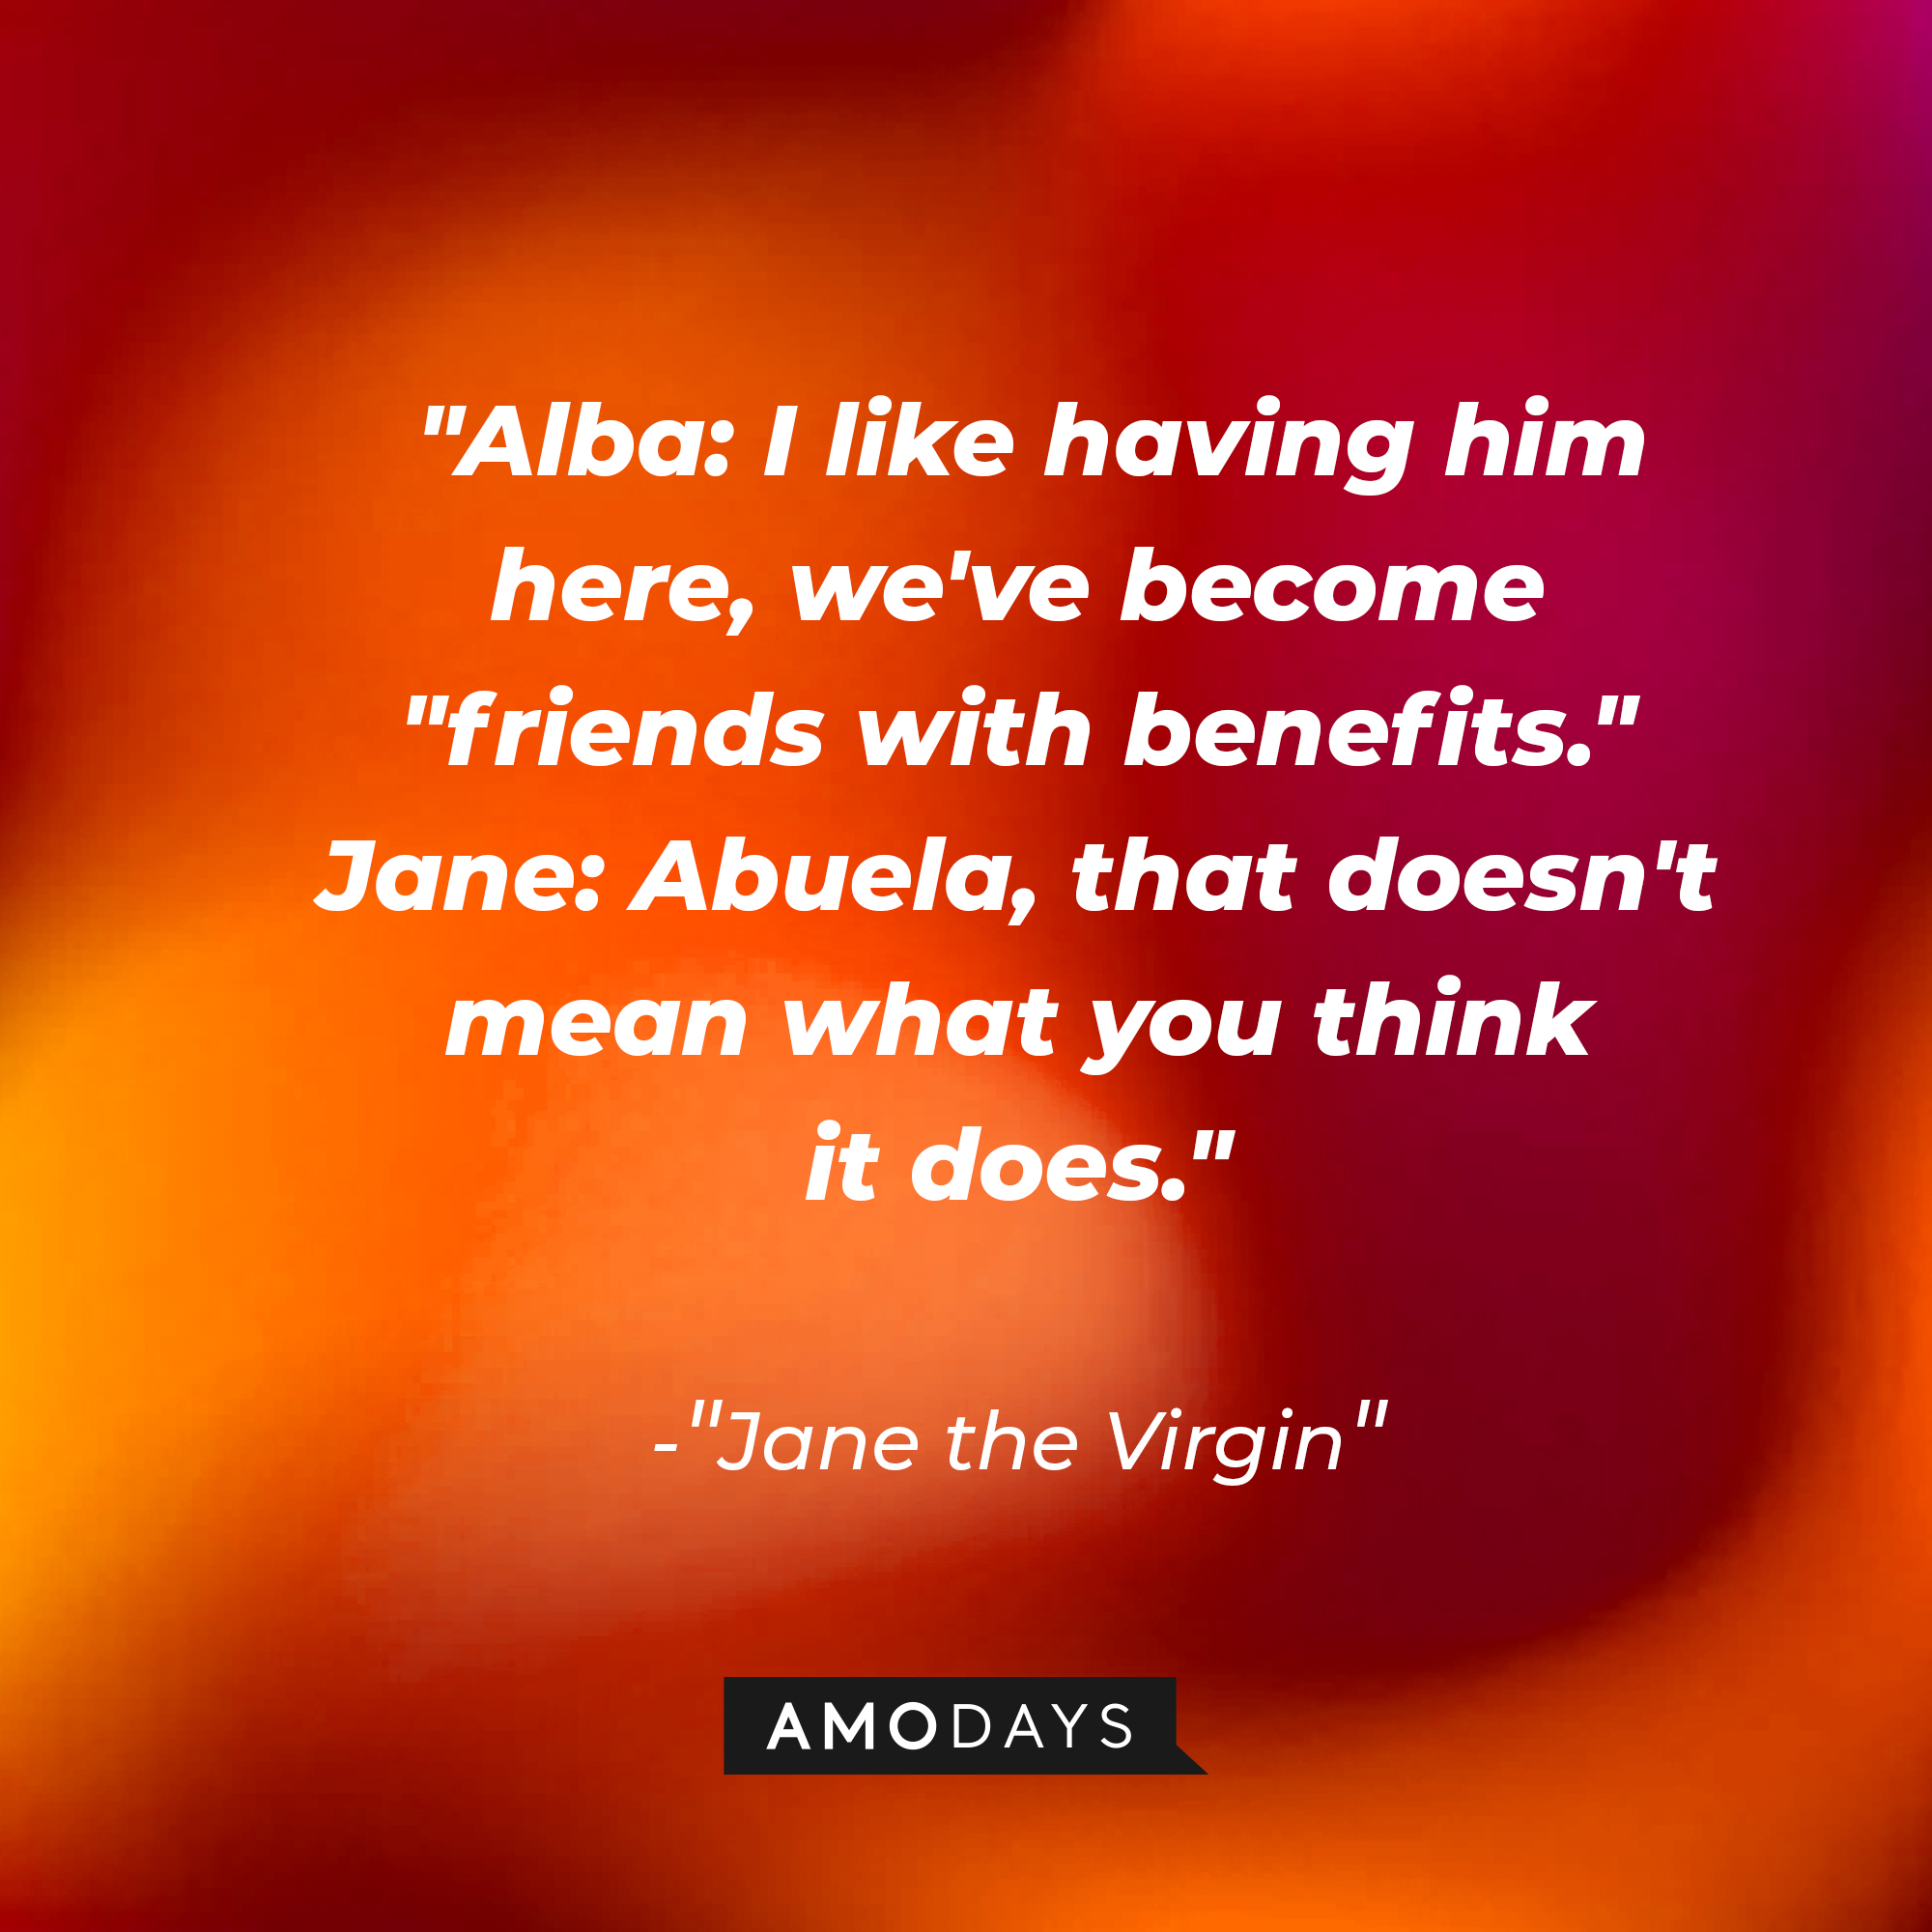 Jane Villanueva's dialogue in "Jane the Virgin:" "Alba: I like having him here, we've become 'friends with benefits;' Jane: Abuela, that doesn't mean what you think it does." | Source: Amodays